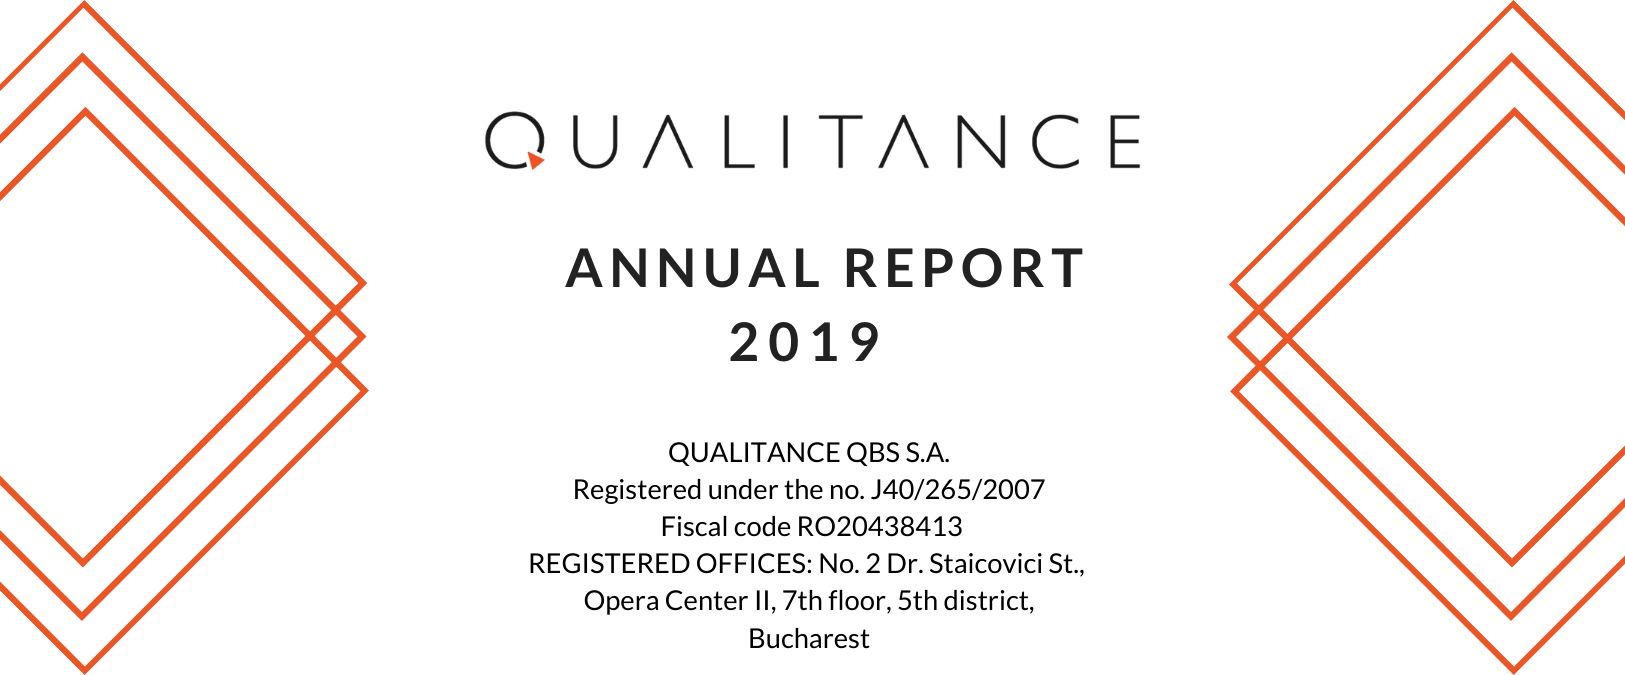 2019 Annual Report by QUALITANCE